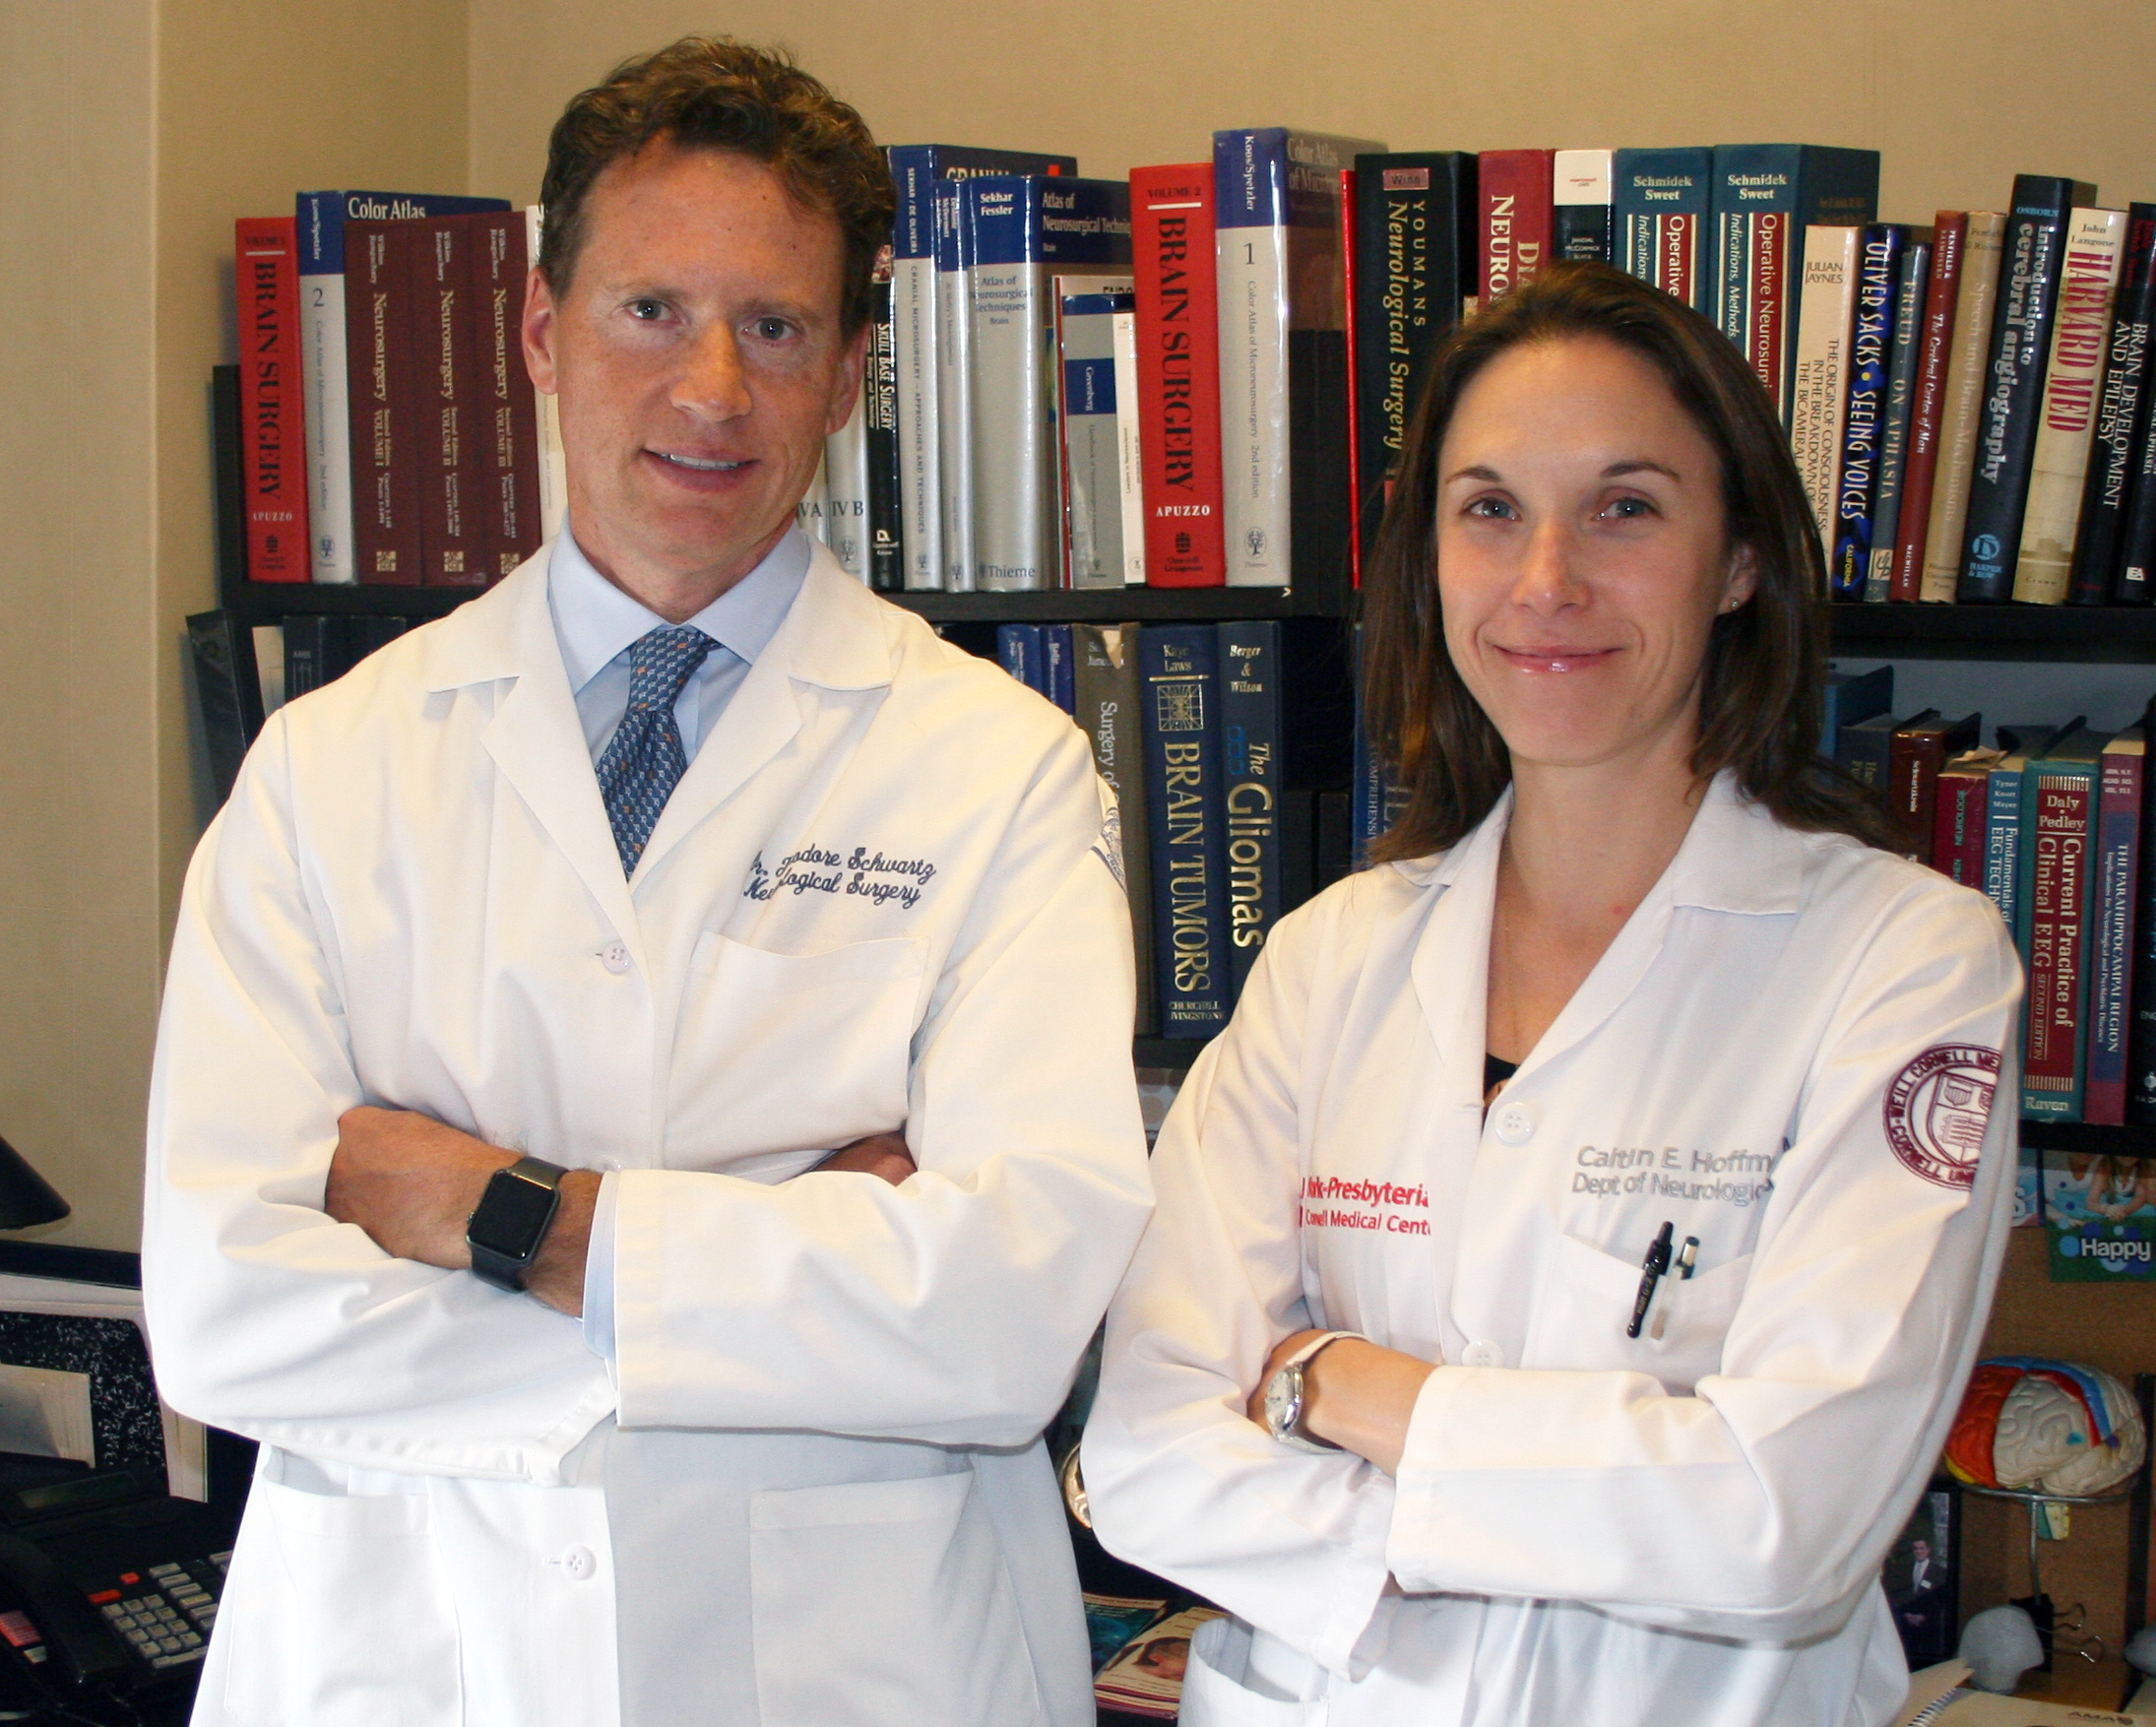 Dr. Theodore Schwartz and Dr. Caitlin Hoffman are our experts in epilepsy surgery